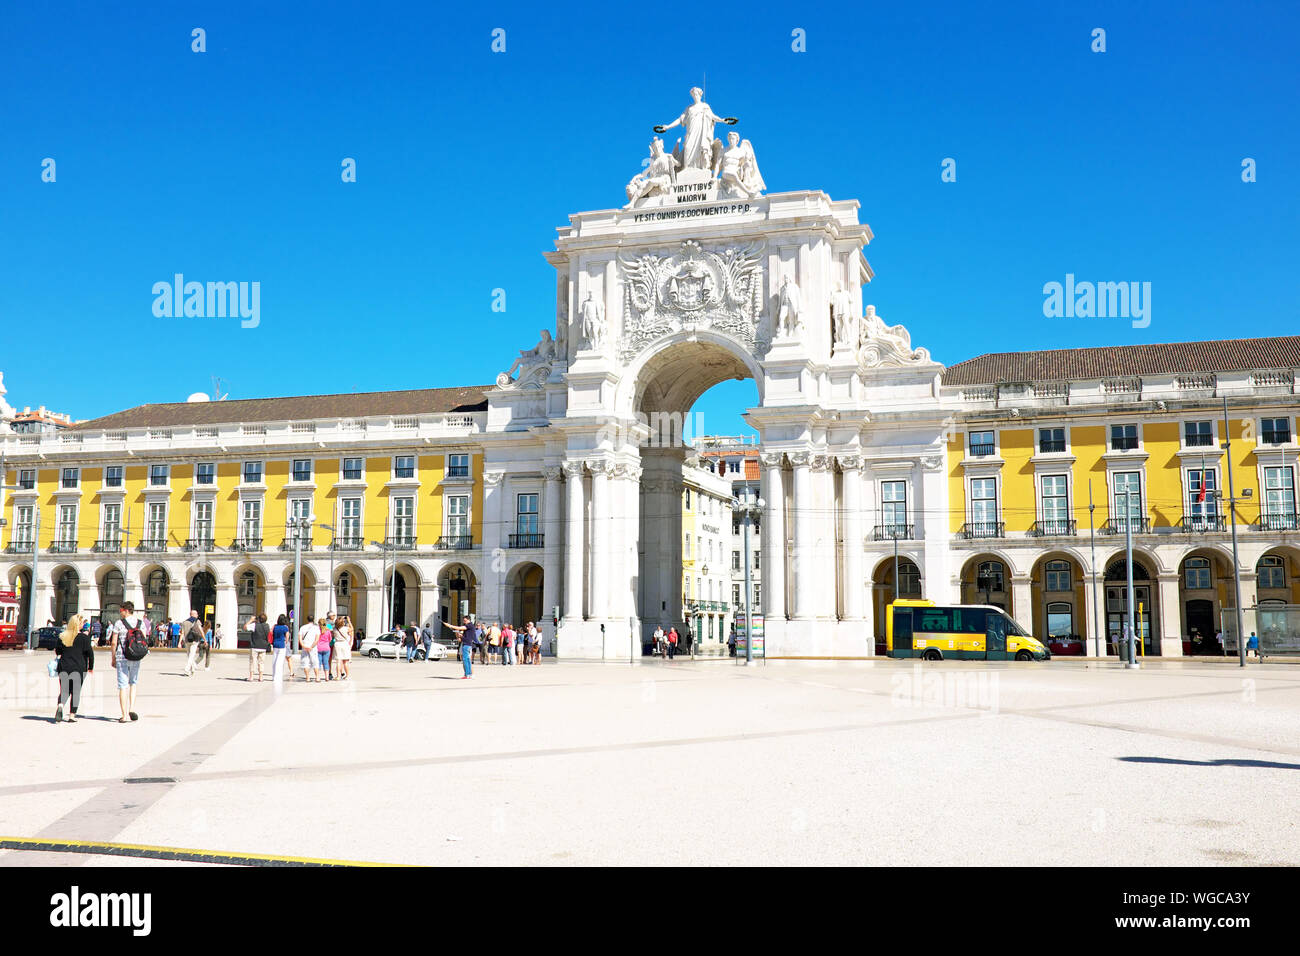 Lisbon, Portugal -May 30, 2015: Commerce square, one of the most important landmarks of the Portuguese capital, with the famous Triumphal Arch in Lisb Stock Photo